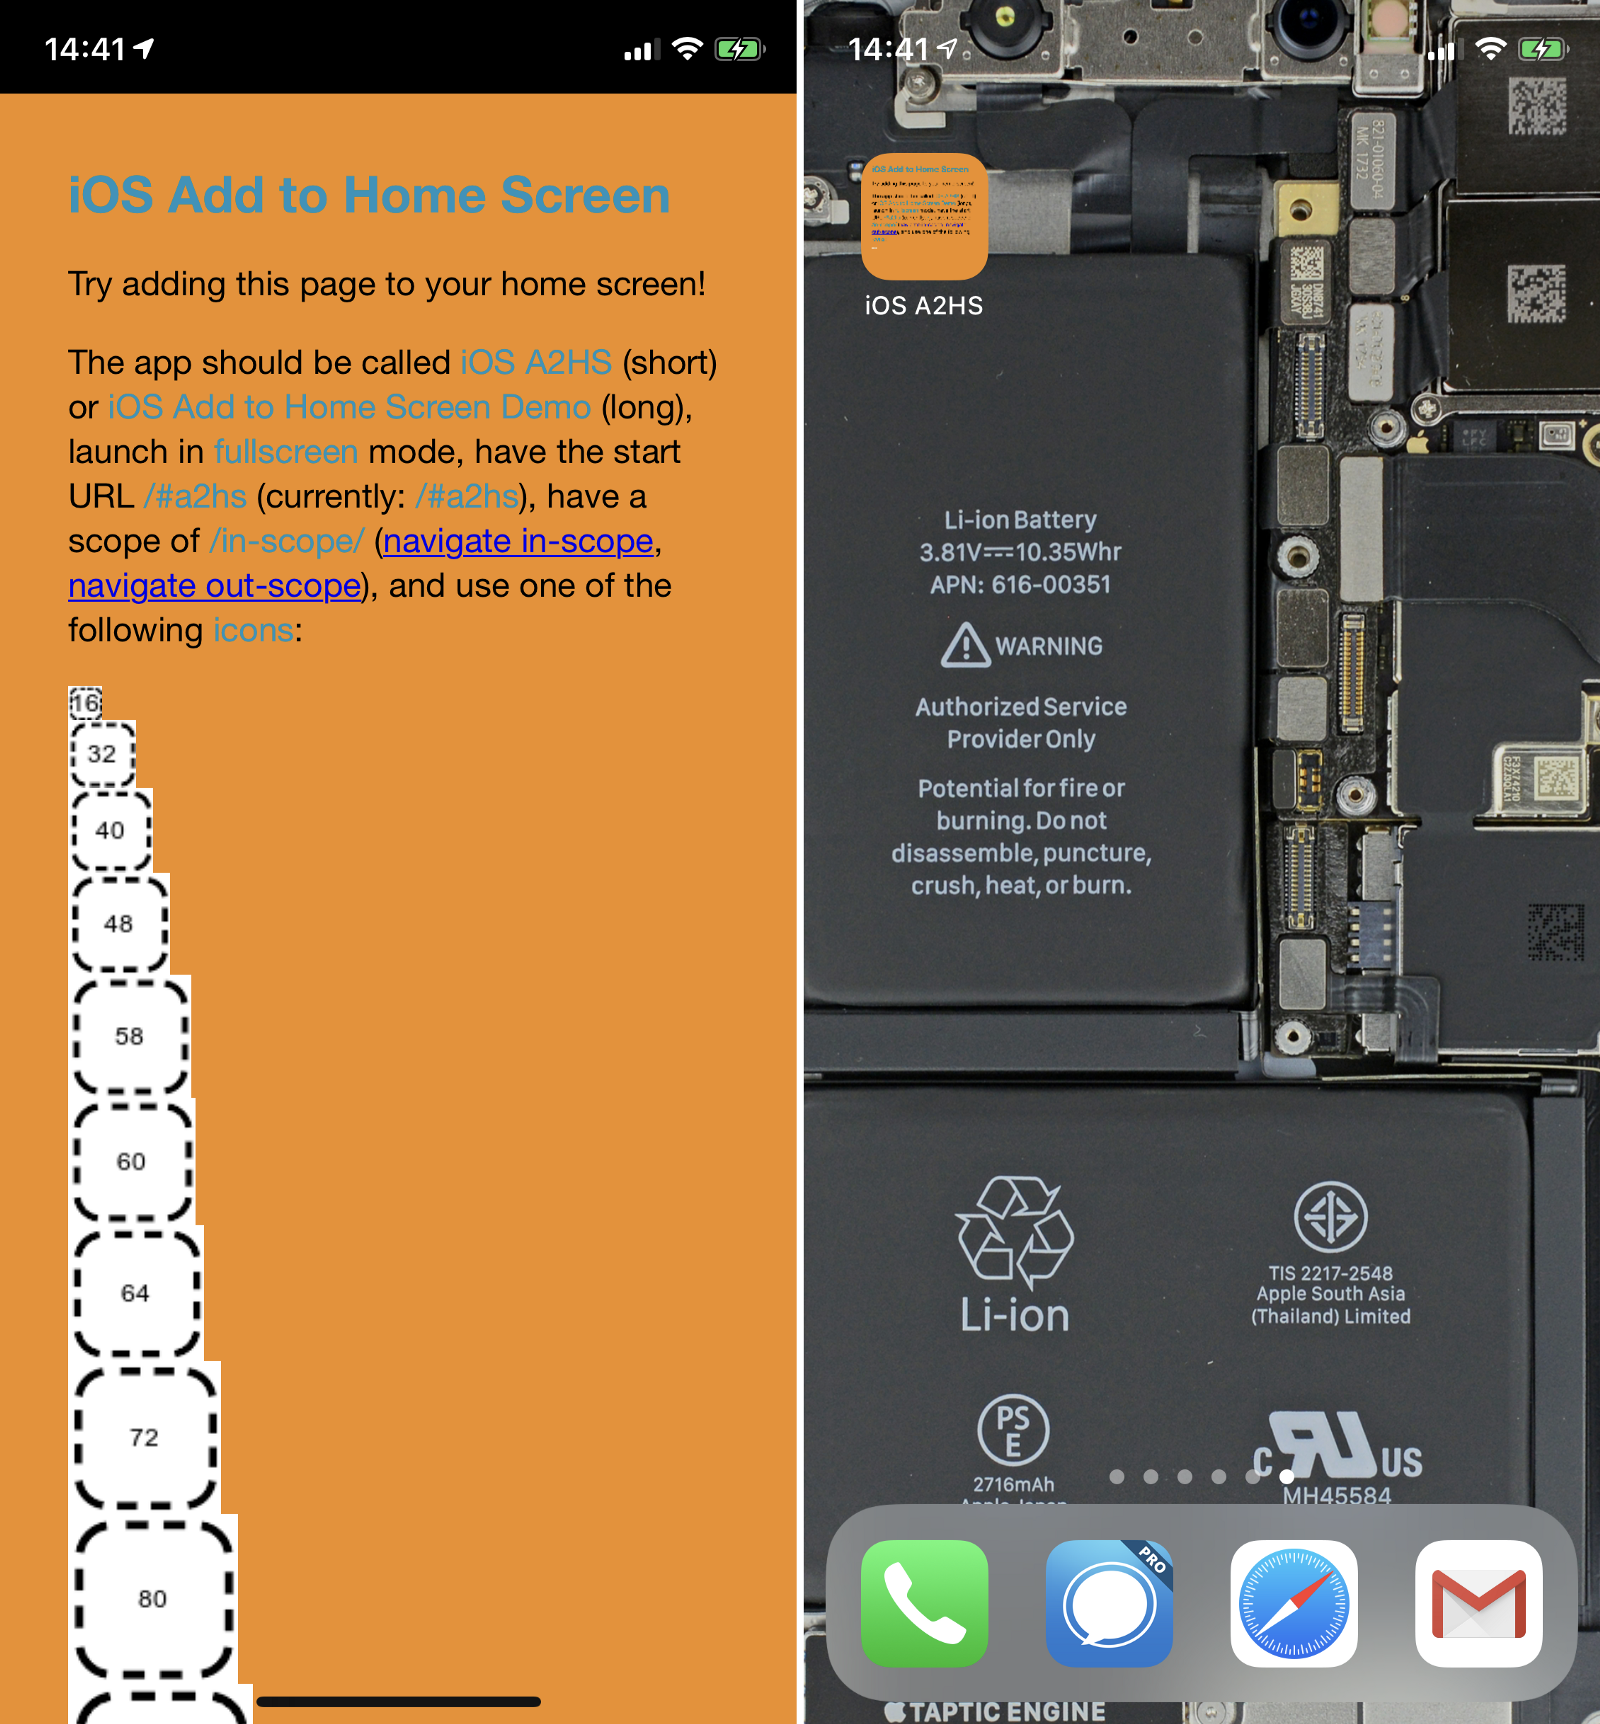 iOS Add to Home Screen tool (left) showing iOS still ignores icons specified in its Web App Manifest (right).